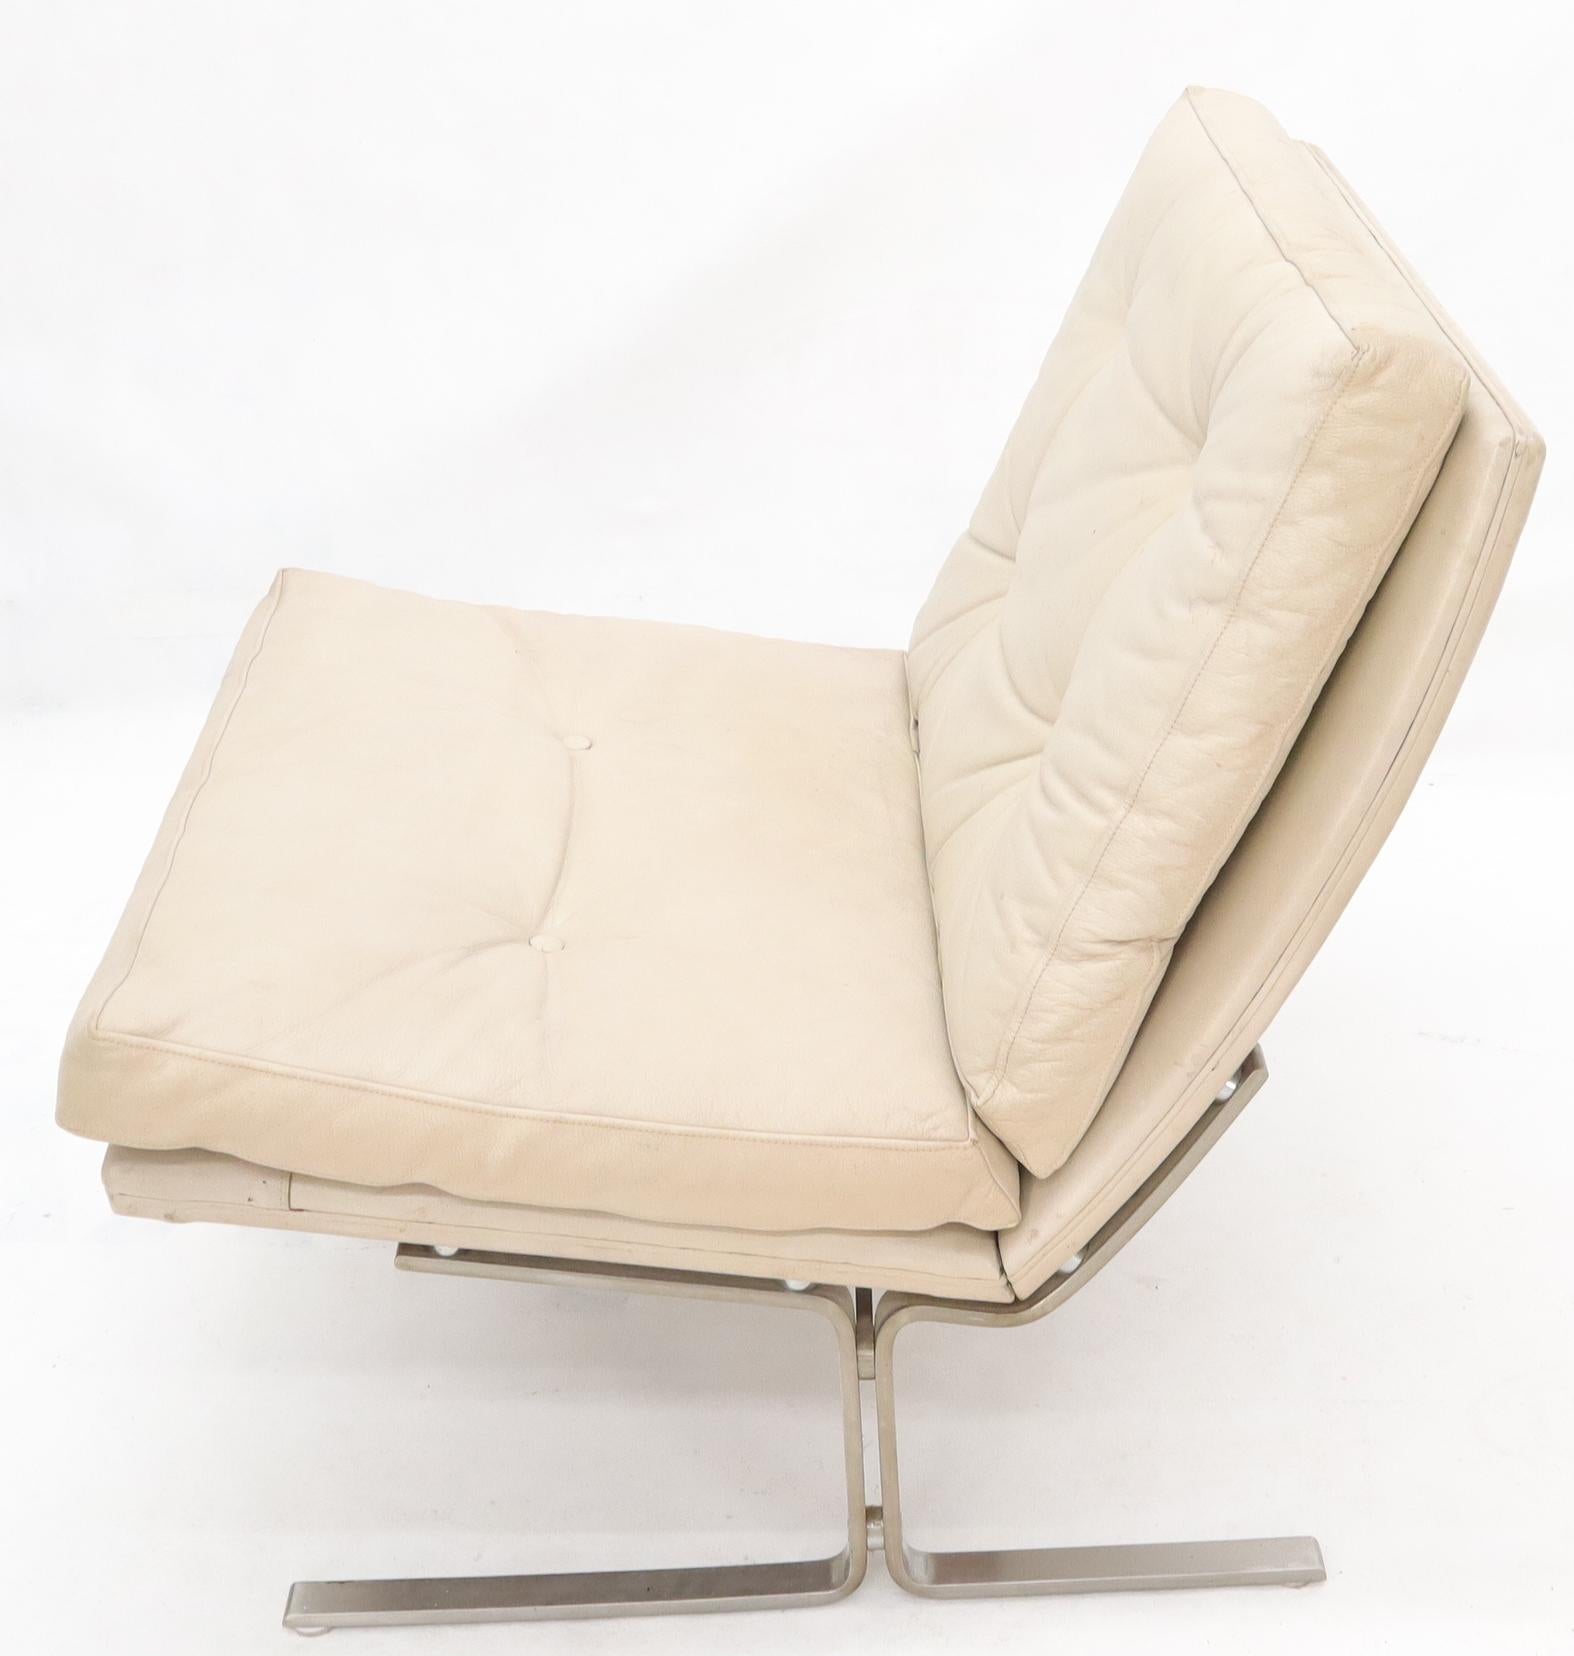 Danish Mid-Century Modern off-white leather scoop shape lounge chair on brushed chrome base. Made in Denmark by Centrum Mobler.